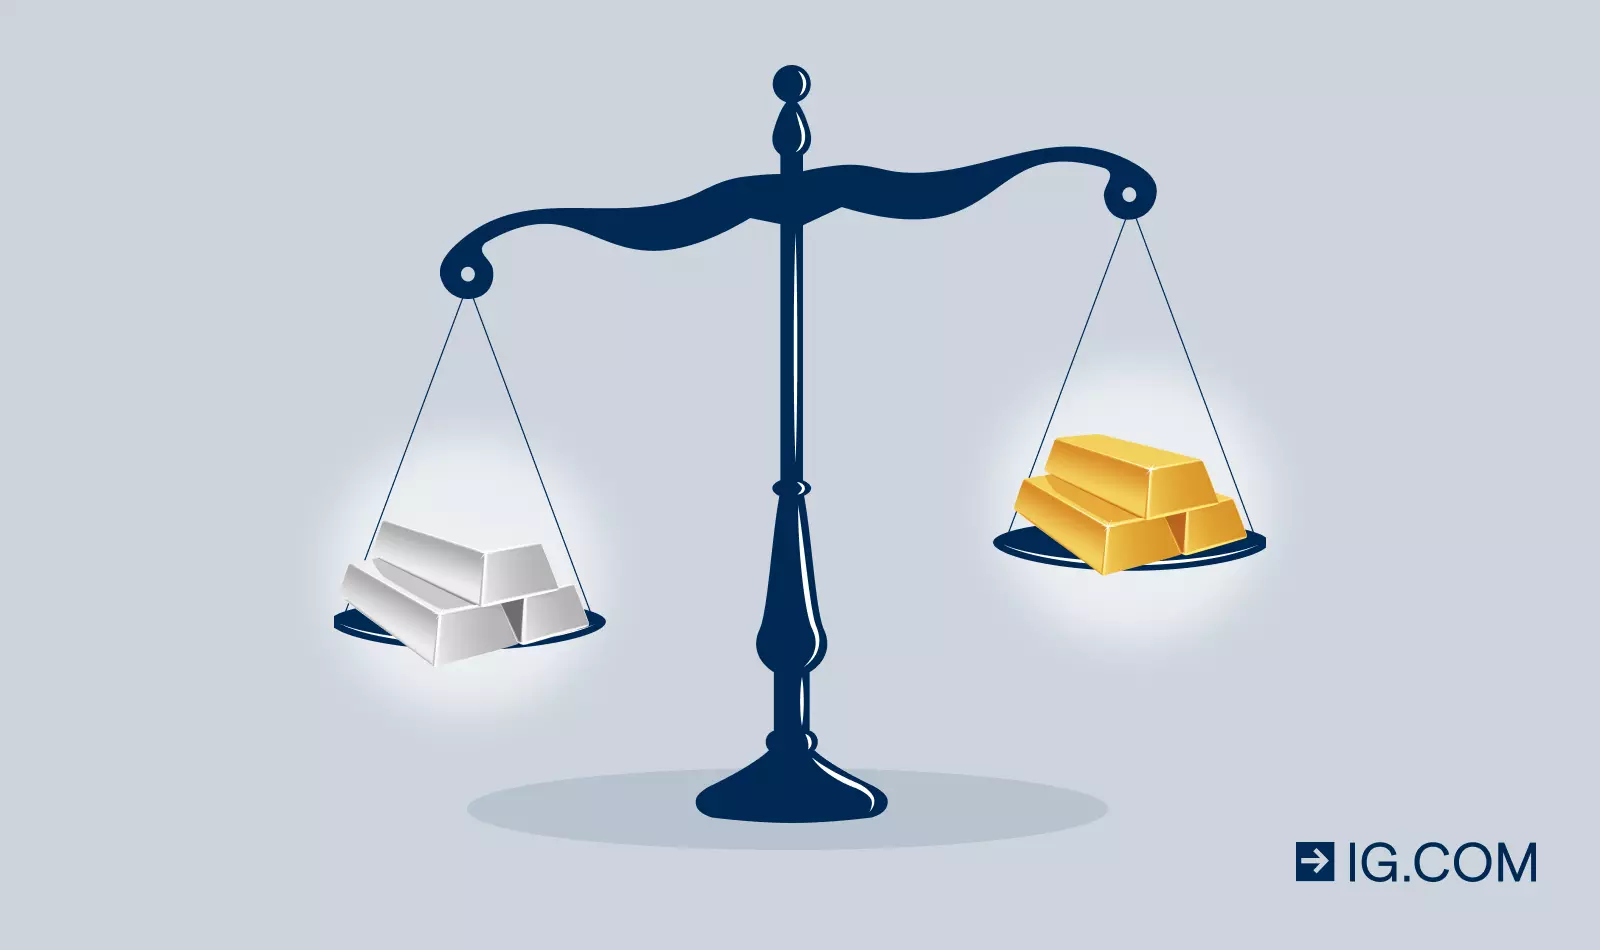 Relationship between silver and gold